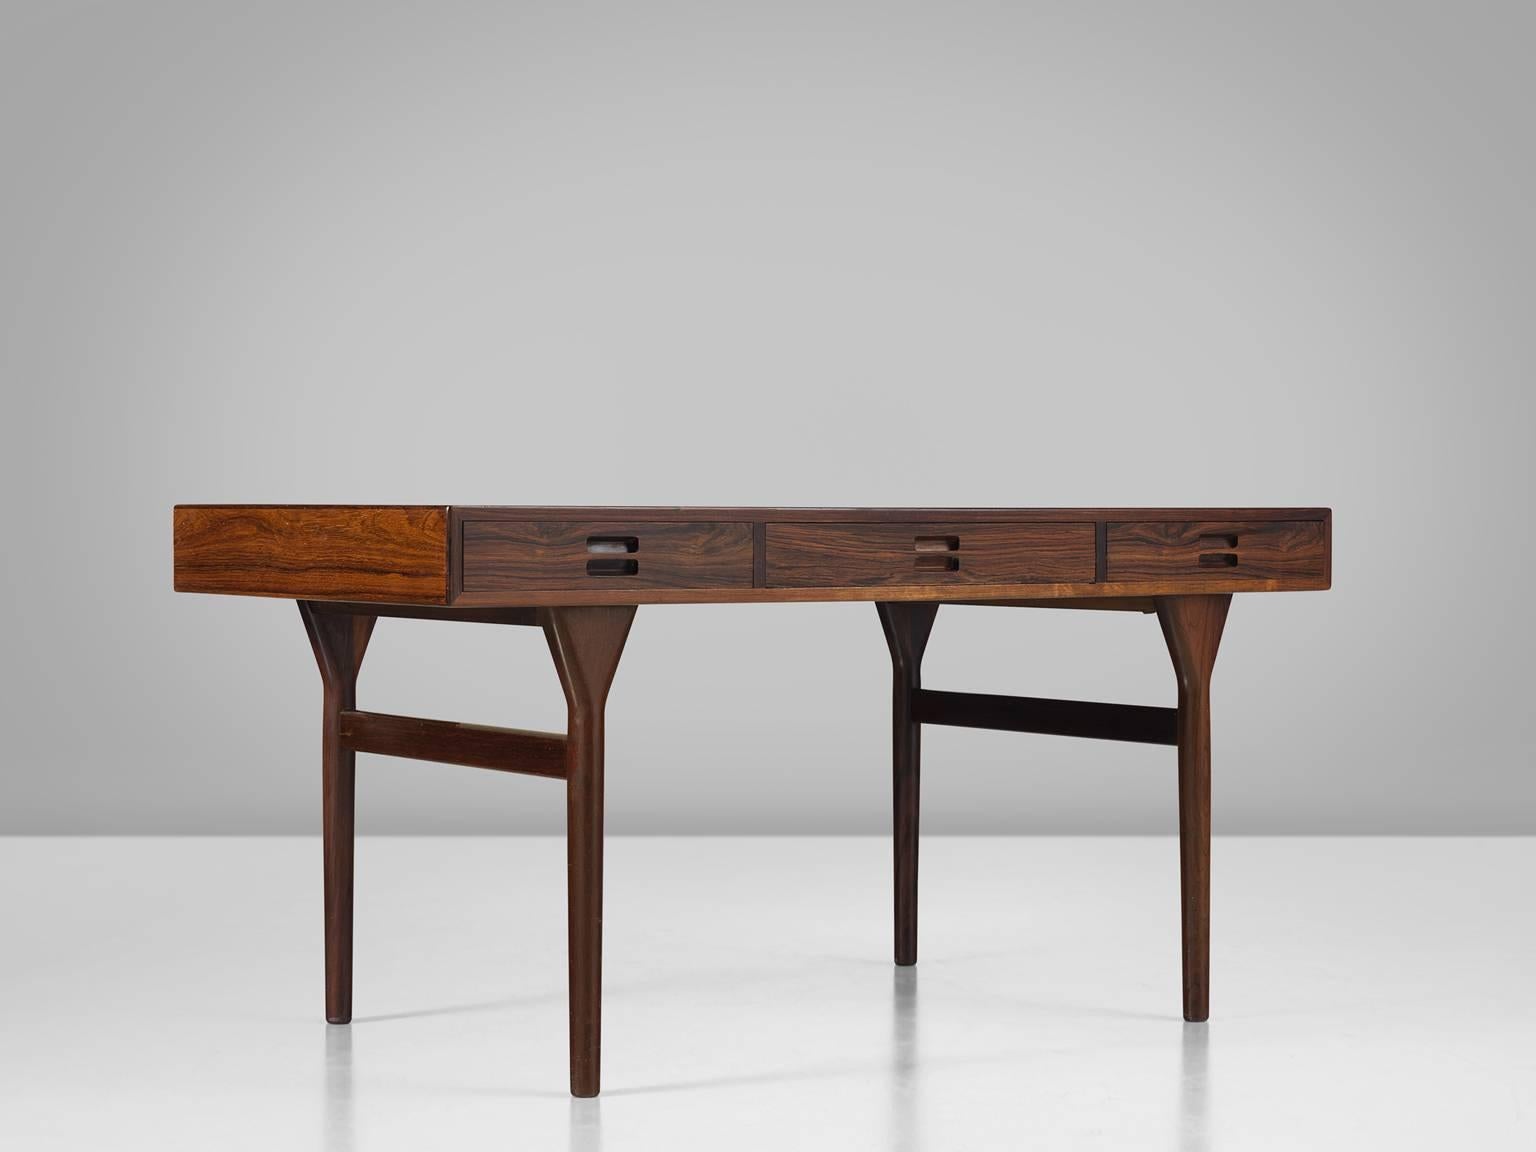 Nanna Ditzel for Søren Willadsen, desk, in rosewood, by Denmark, design 1958, production 1960s. 

Elegant designed freestanding desk designed by one of the best known Danish designers Nanna Ditzel. It creates it's strength and beauty due to simple